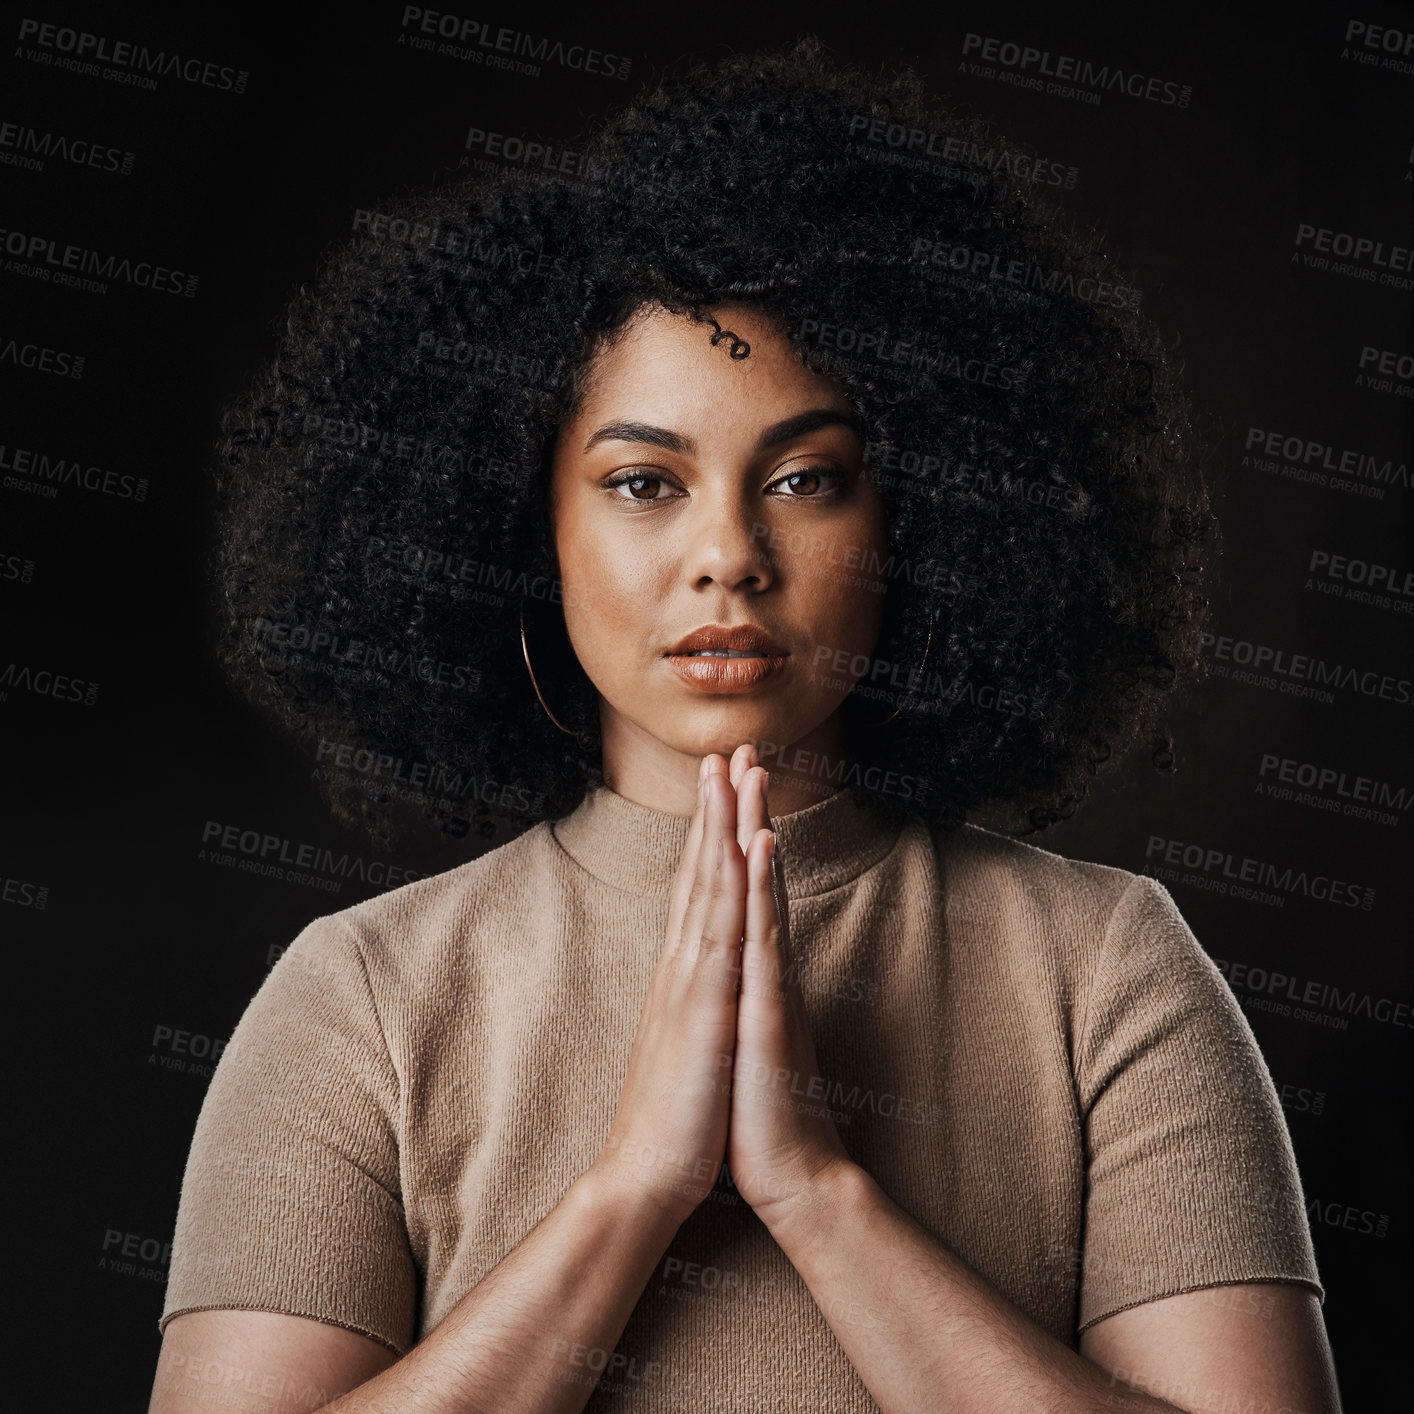 Buy stock photo Cropped portrait of an attractive young woman in prayer against a dark background in studio